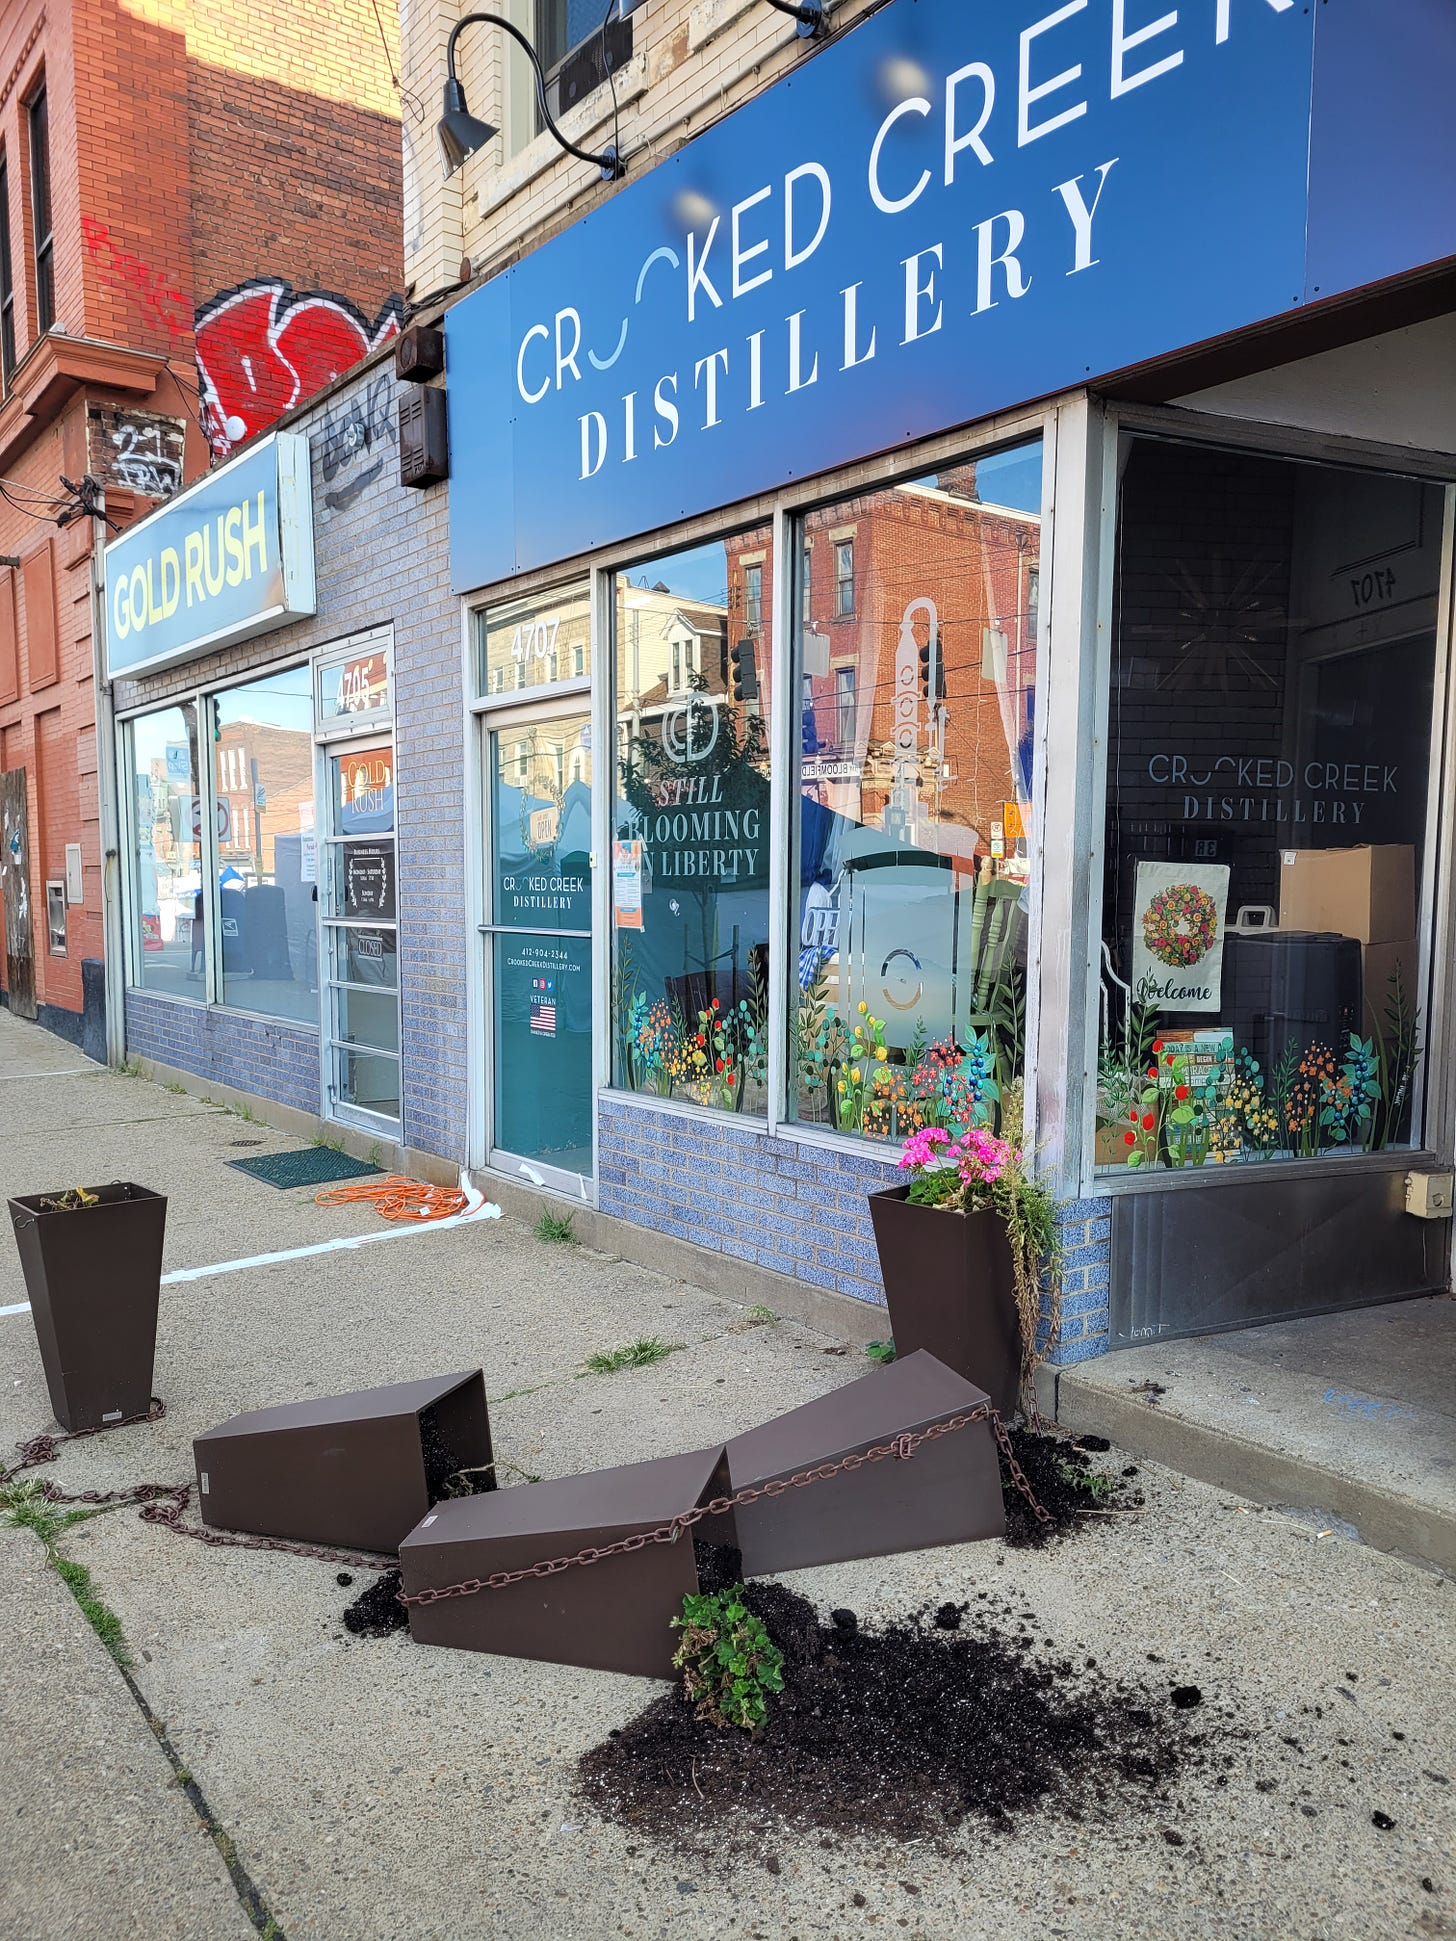 three overturned square planters litter dirt on the sidewalk in front of a shop called Crooked Creek Distillery